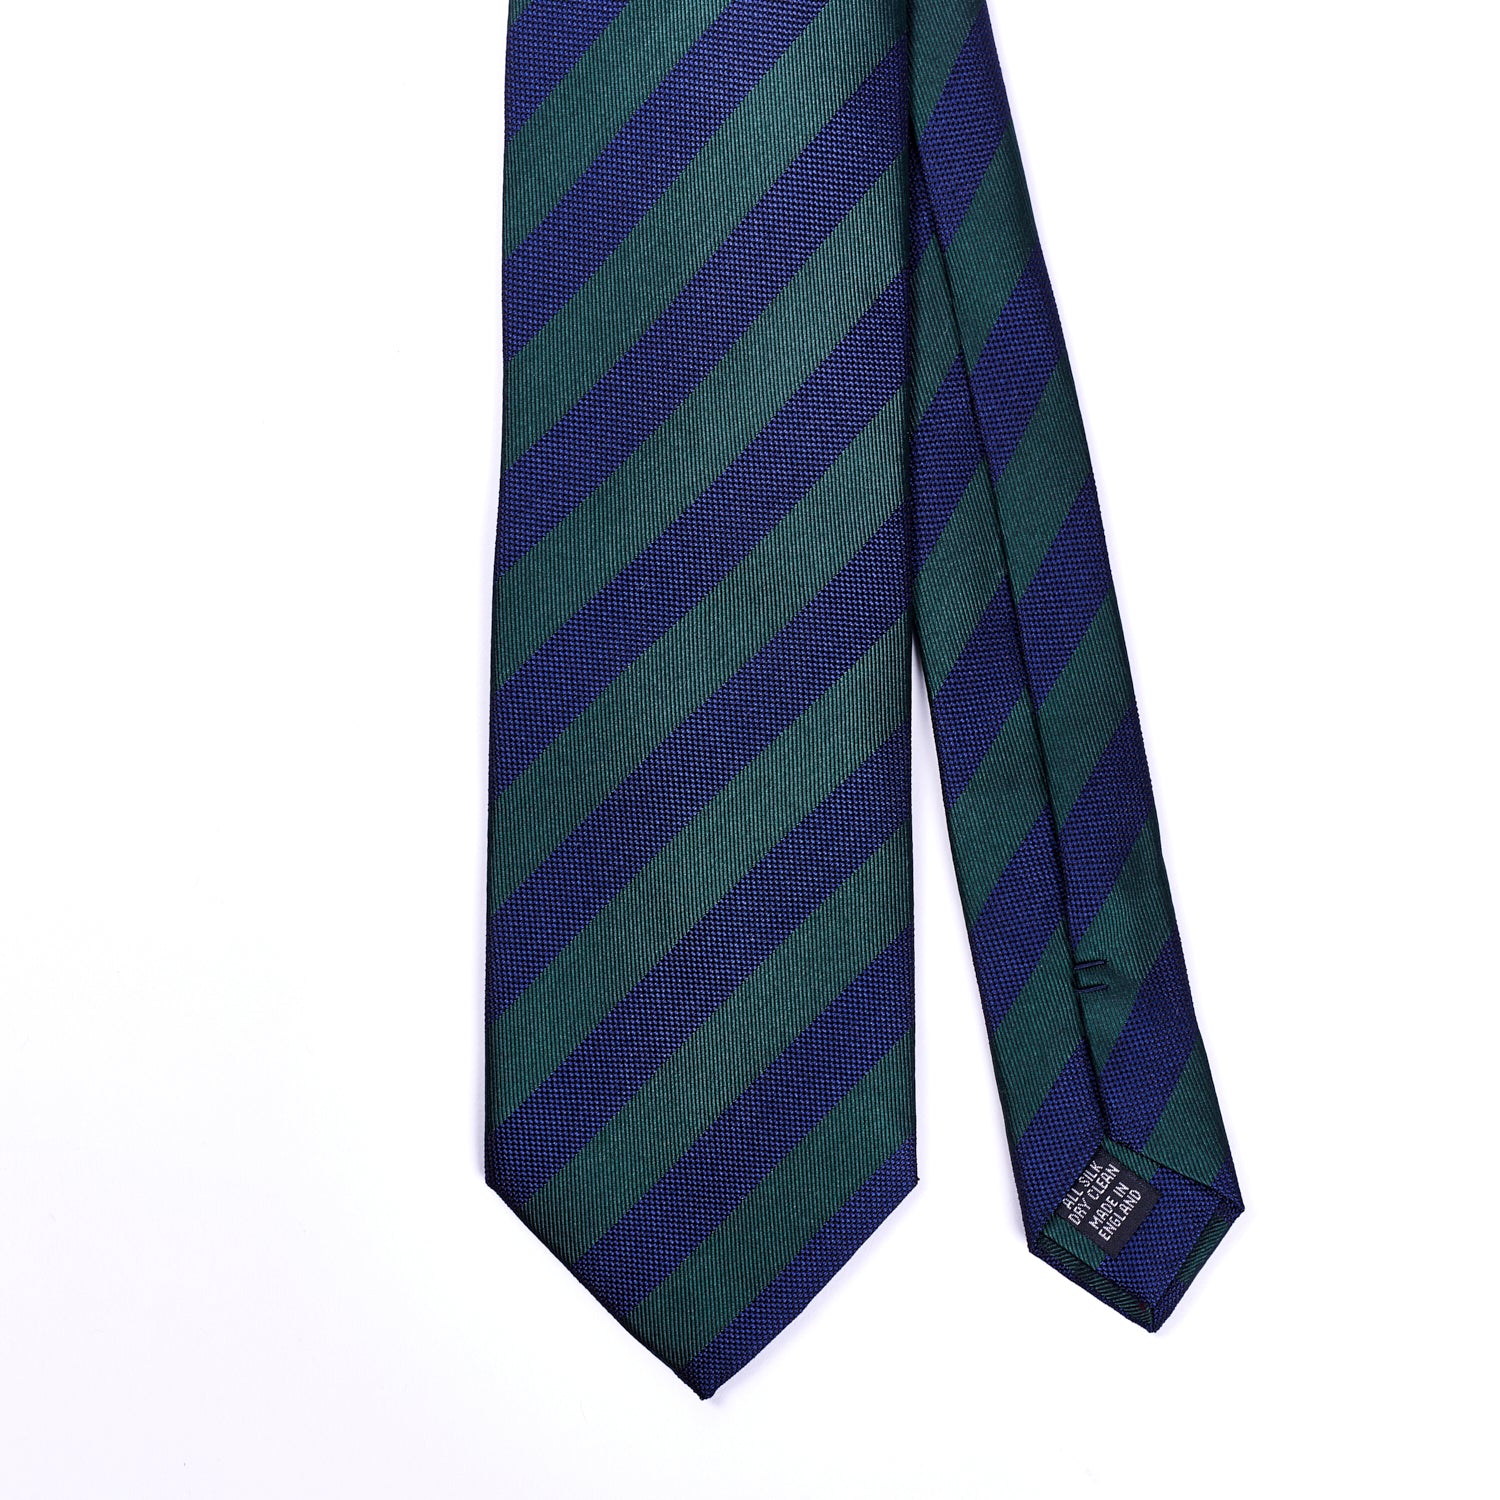 A high-quality Sovereign Grade Woven Navy and Green Rep Tie, 150 cm from KirbyAllison.com with blue and green stripes on a white background.